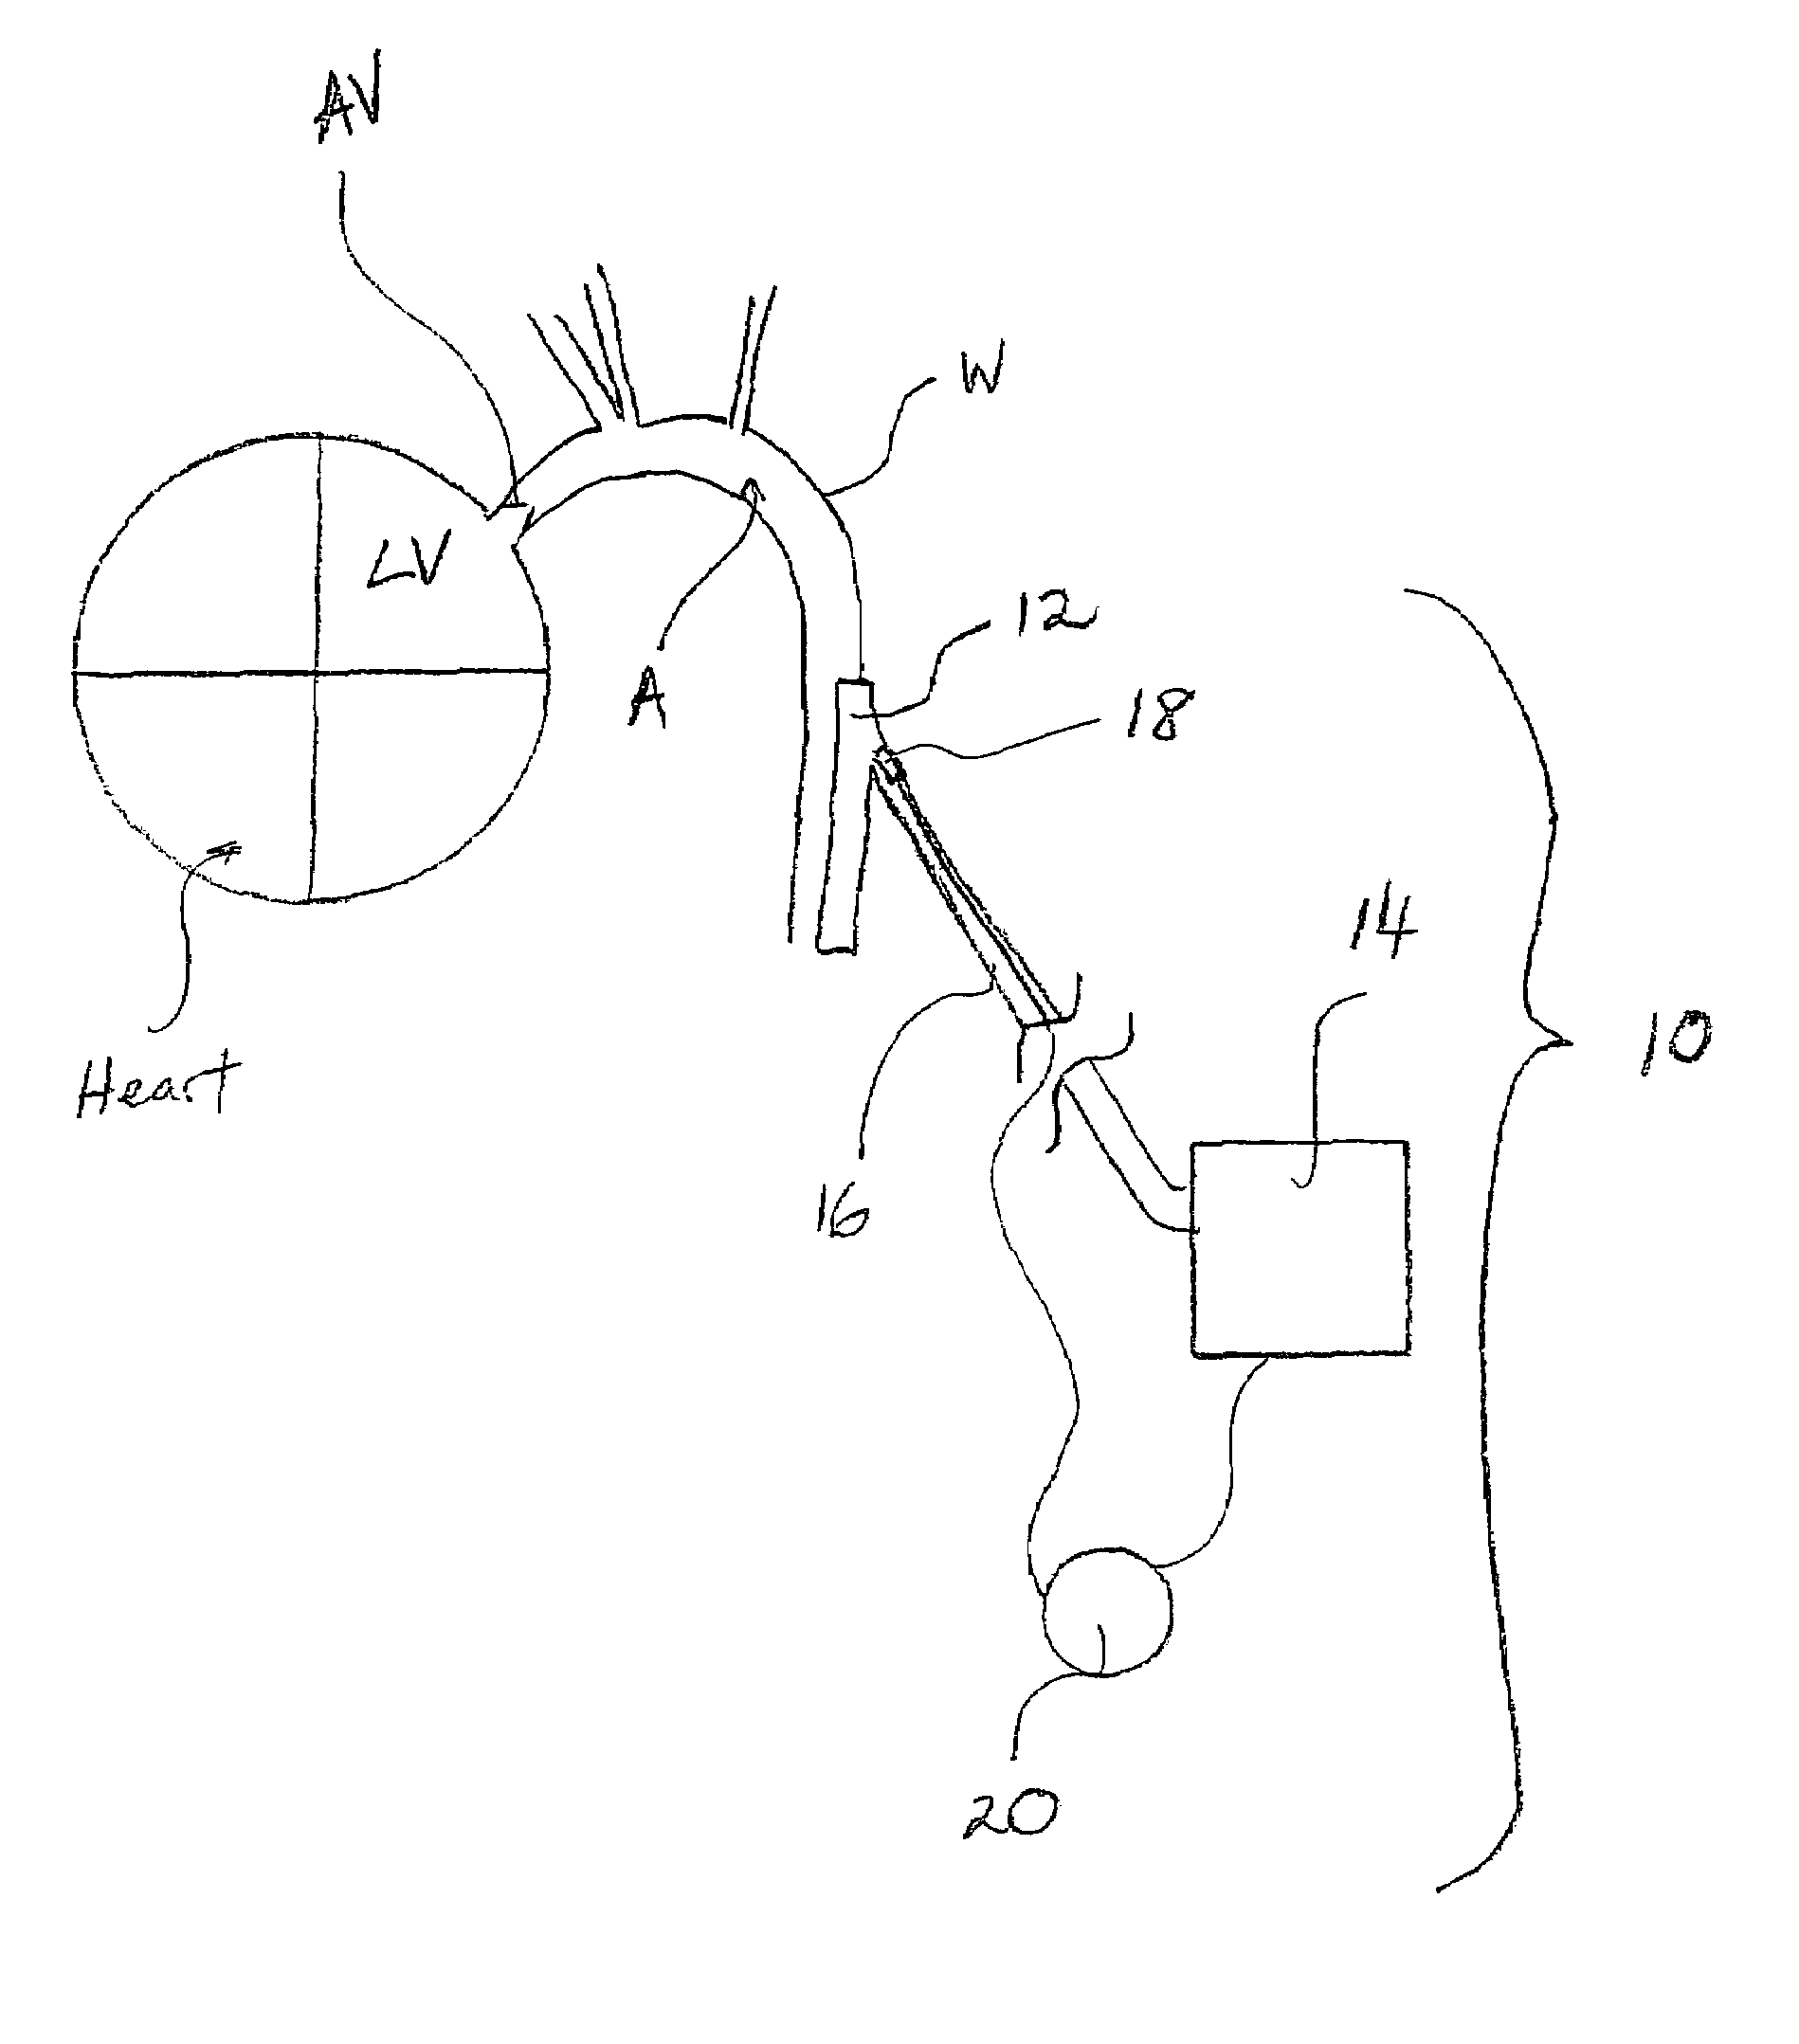 Synchronization system between aortic valve and cardiac assist device